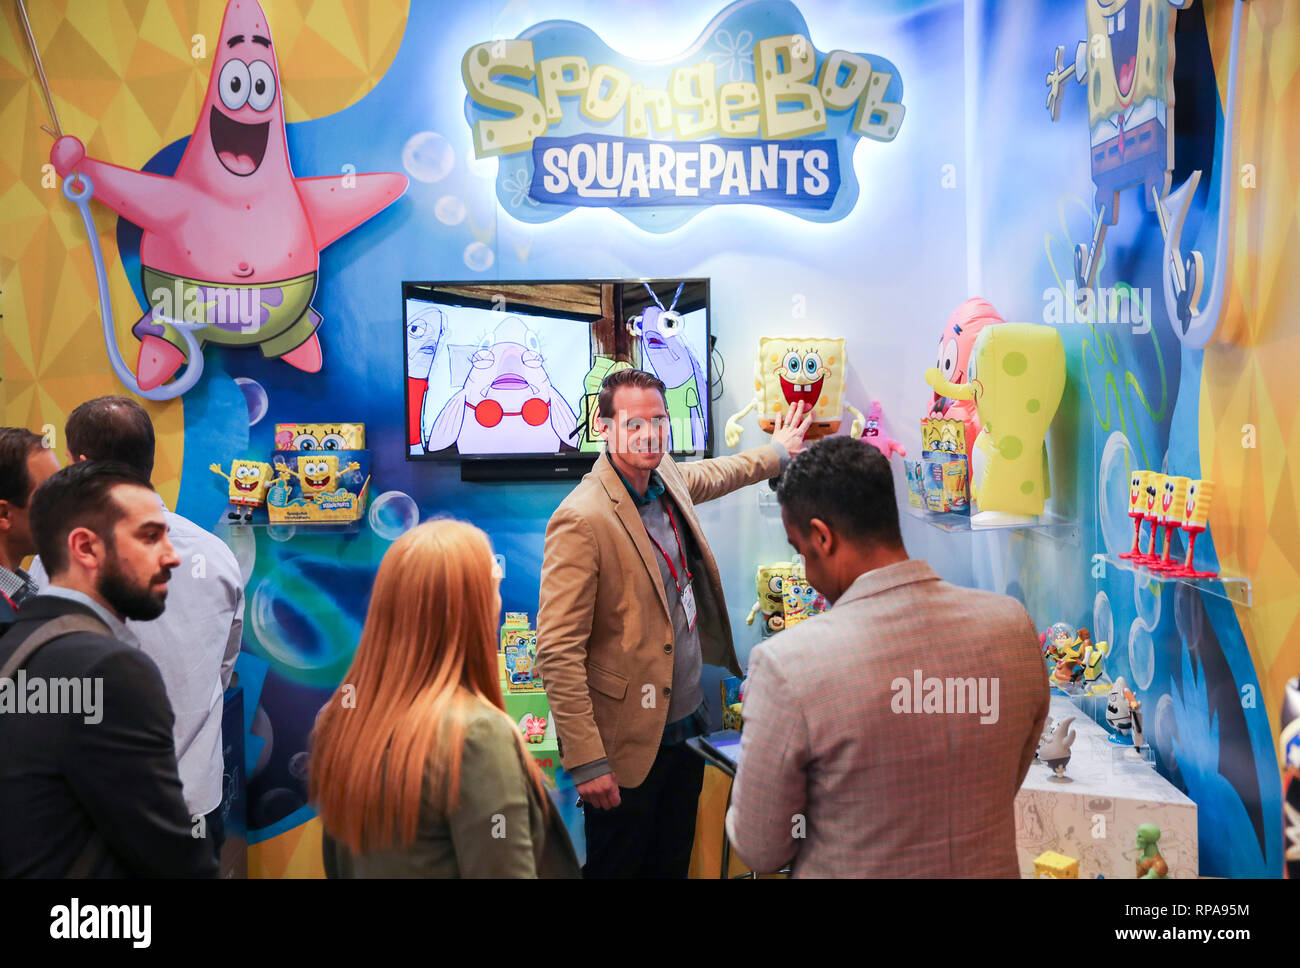 (190221) -- NEW YORK, Feb. 21, 2019 (Xinhua) -- Visitors look at toy products of SpongeBob at the booth of Alpha Group Co., Ltd., a major animation, toy and entertainment player from Guangdong Province in southern China, during the 116th Annual North American International Toy Fair at the Jacob K. Javits Convention Center in New York, the United States, on Feb. 19, 2019. Chinese toy manufacturers, which produce around 75 percent of global toys each year, are rising up the value chain from the original role as contract manufacturers to designers and makers of their own brands. (Xinhua/Wang Ying Stock Photo